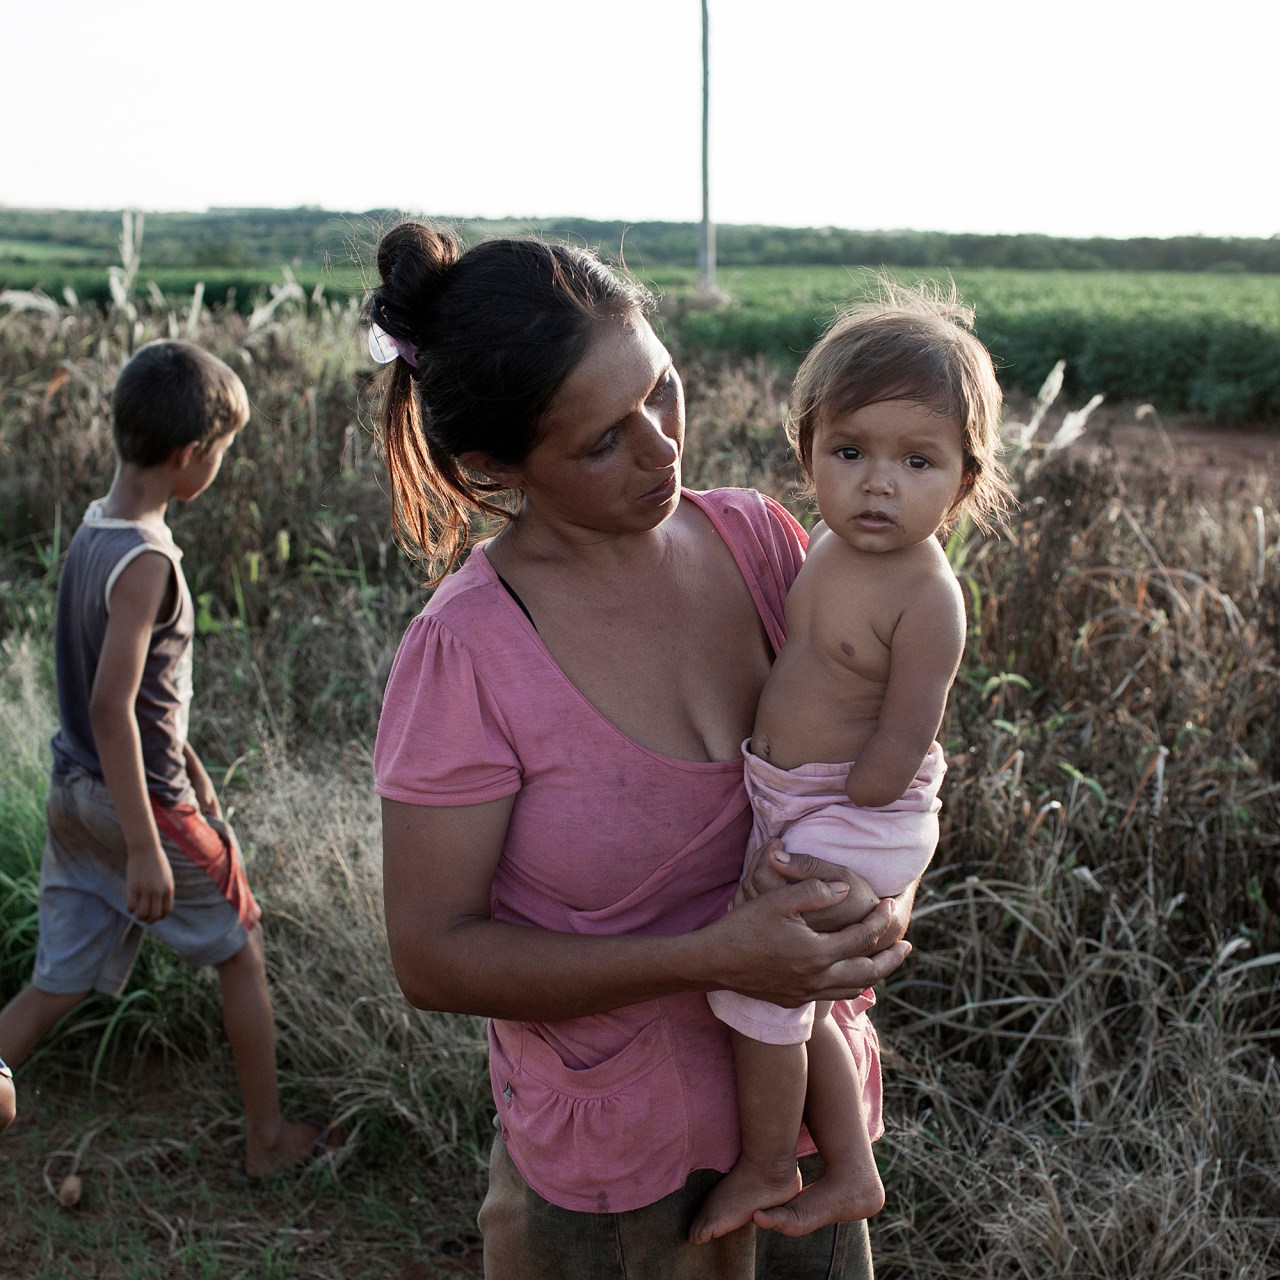 Magdalena Prete, 30, with her daughter Andrea Natali. Prete believes her daughter was born without a hand due to exposure to pesticides during her pregnancy.